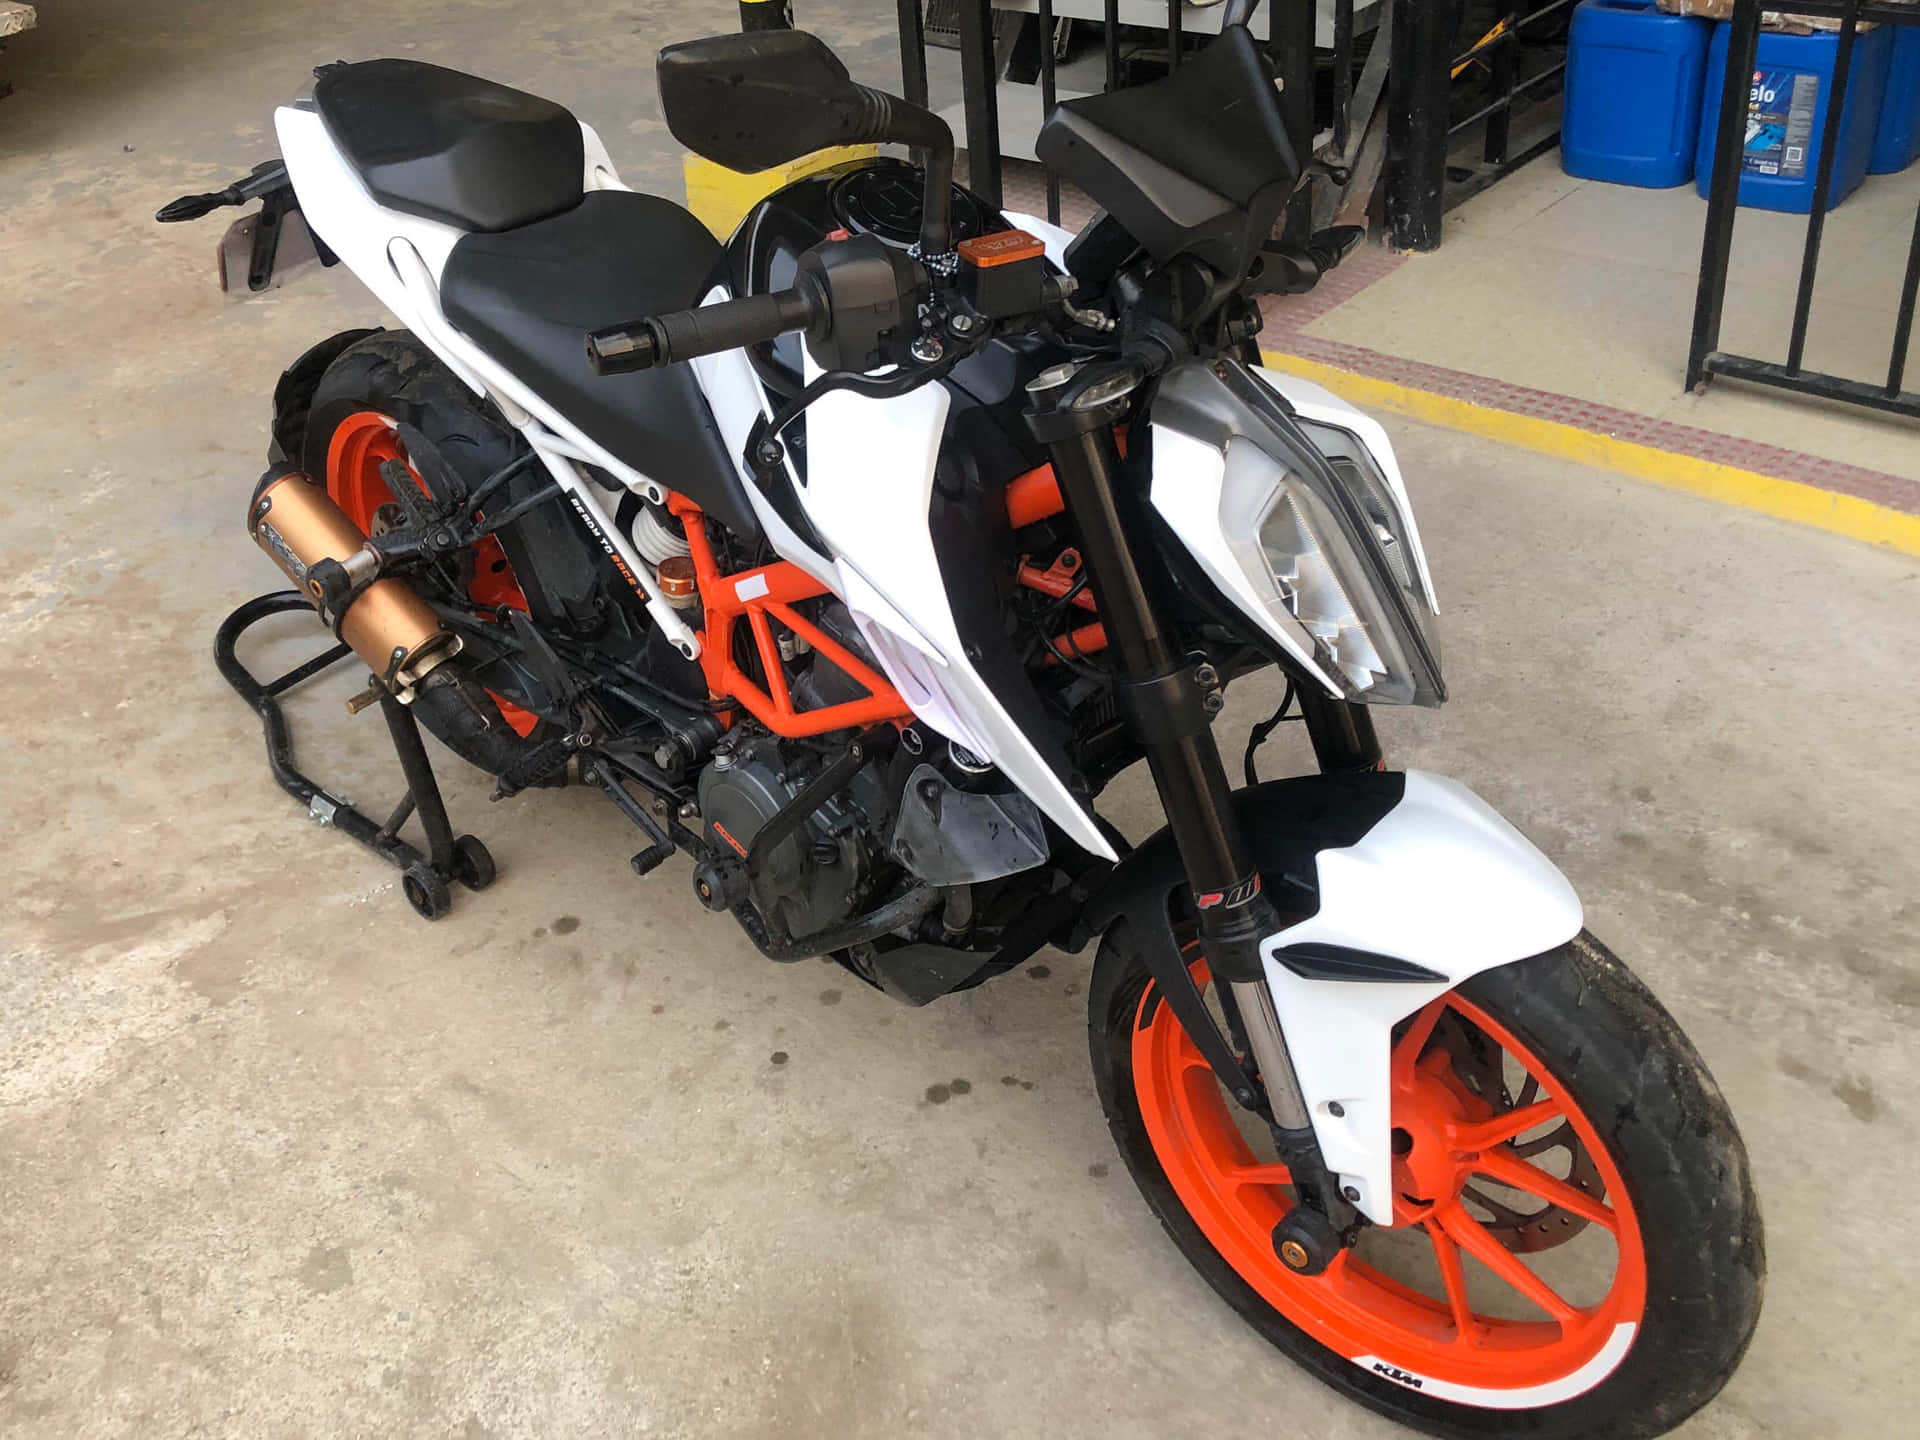 Cool Ktm Duke 390 Motorcycle Picture